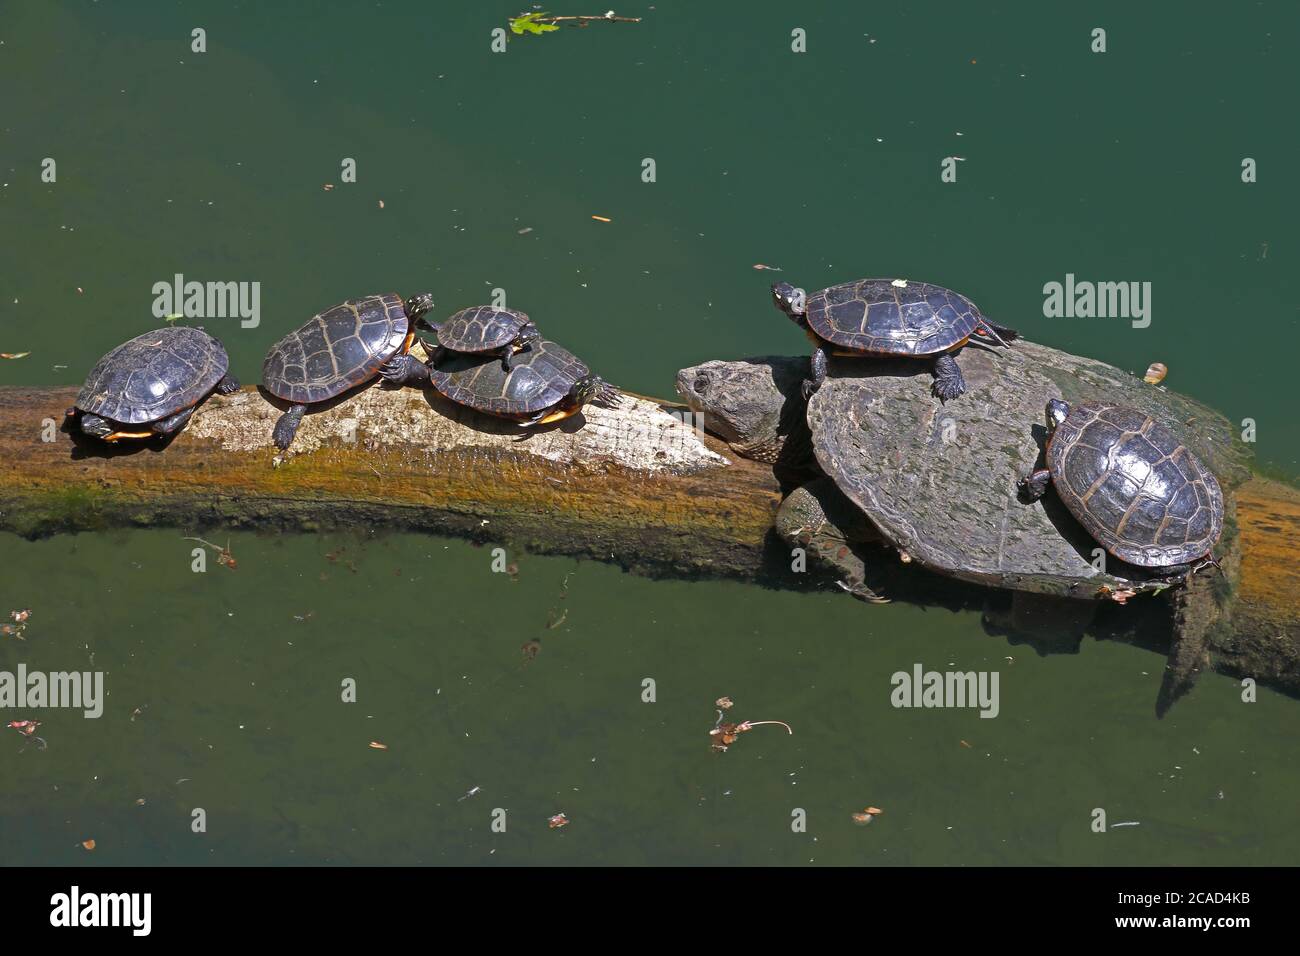 Snapping turtle, Chelydra serpentina, and painted turtles, Chrysemys picta, basking, Maryland Stock Photo